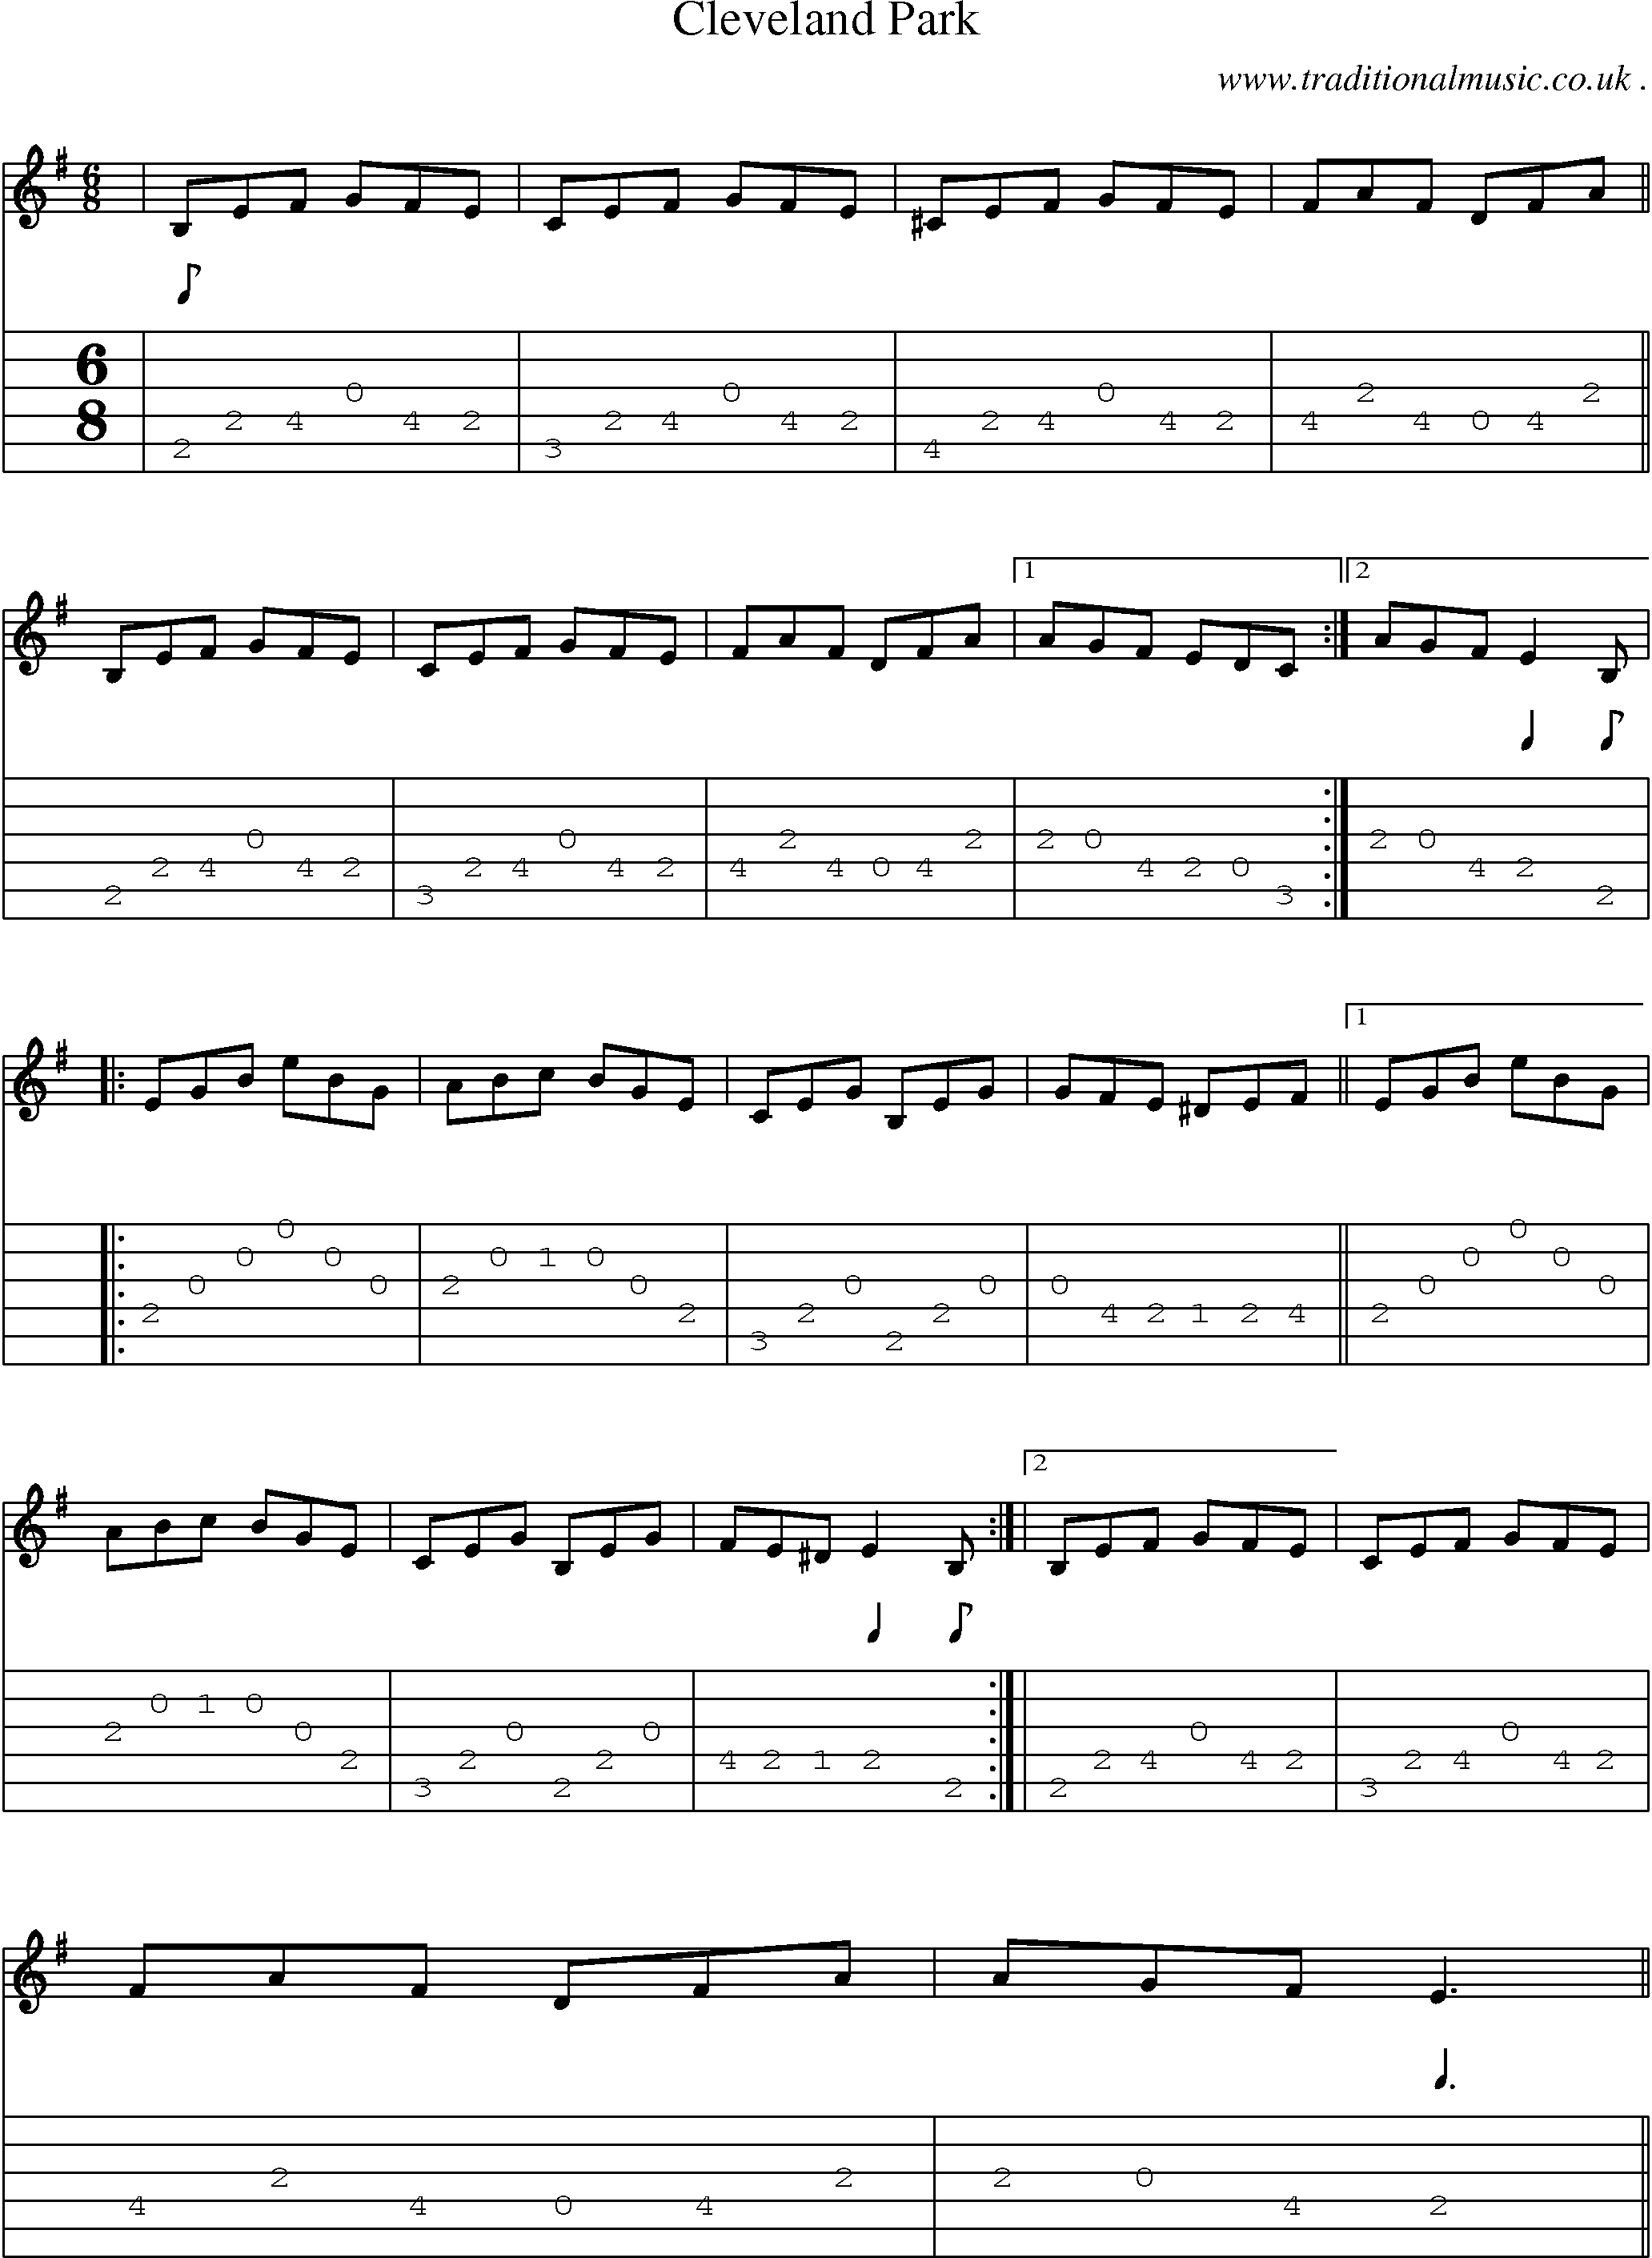 Sheet-Music and Guitar Tabs for Cleveland Park